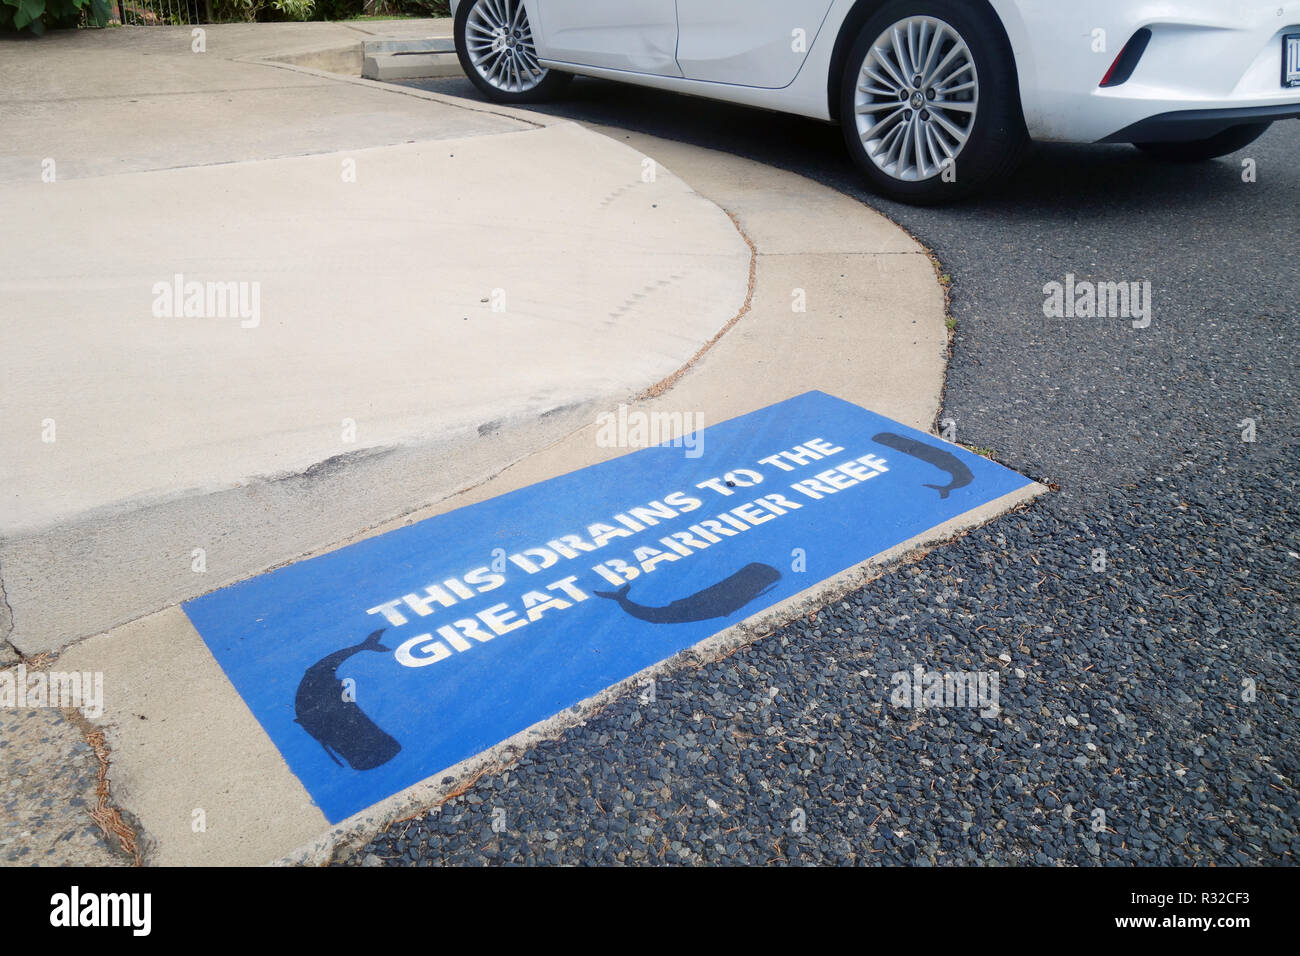 Stencilled sign reminding that this carpark drains to the Great Barrier Reef, Rosslyn Bay marina, Yeppoon, Queensland, Australia. No PR Stock Photo